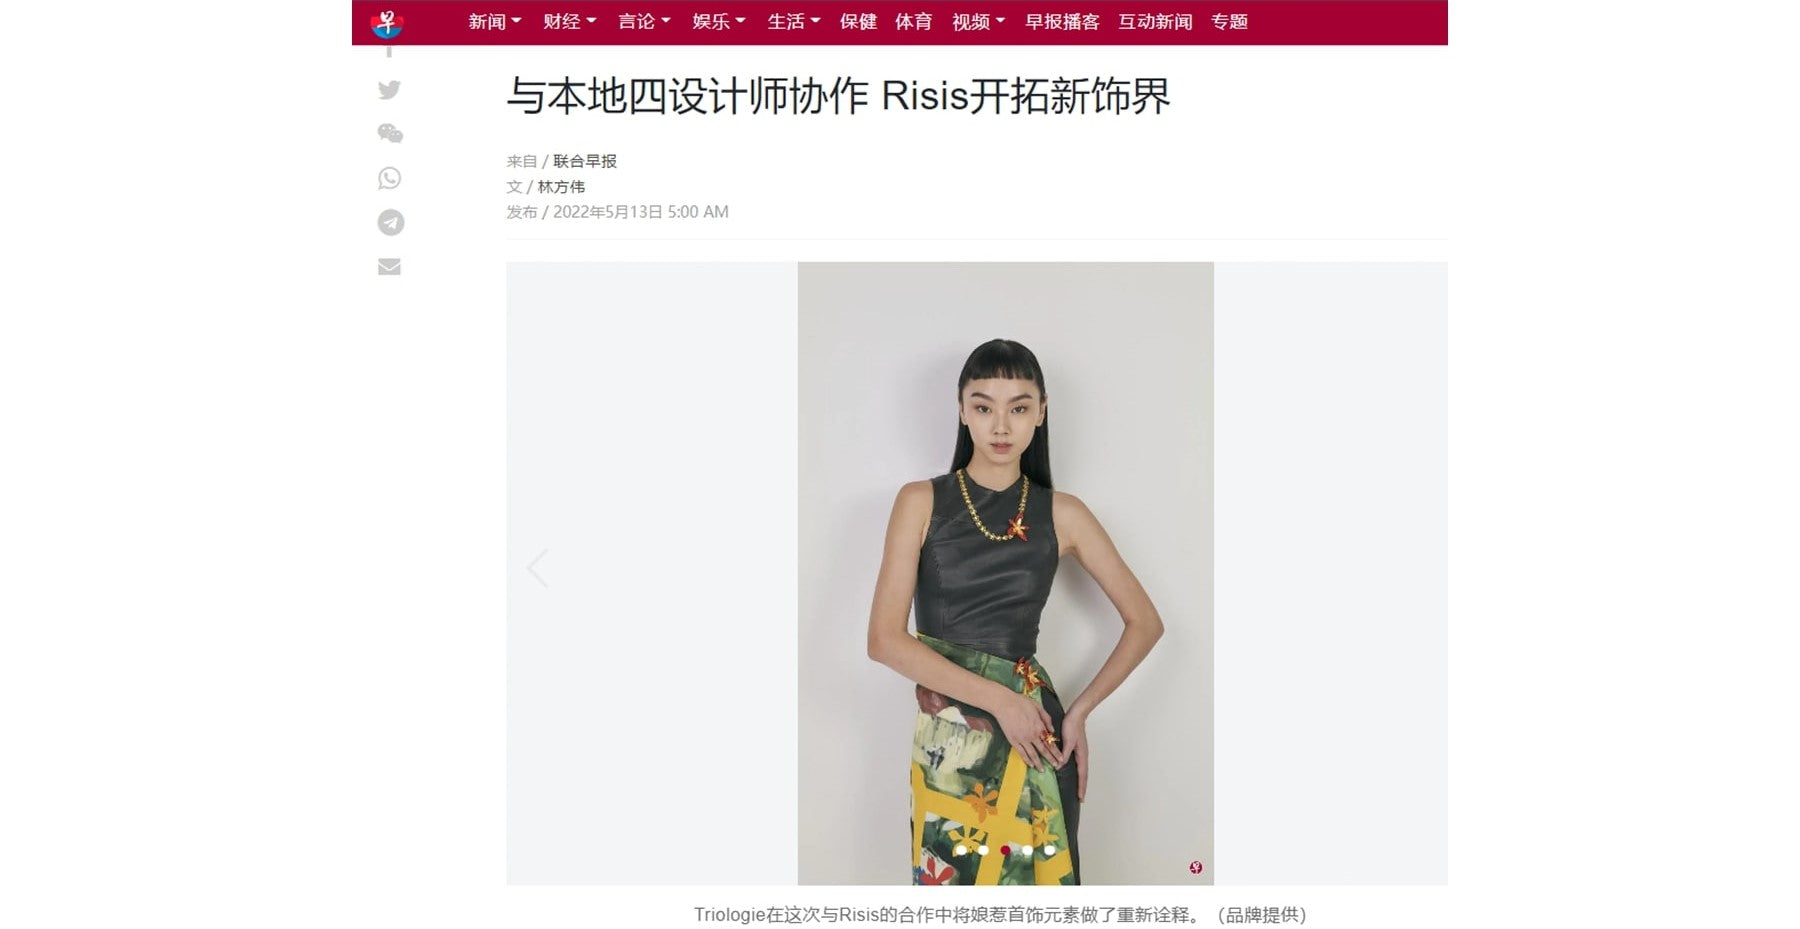 risis-in-collaboration-with-four-local-designers-featured-on-lian-he-zao-bao